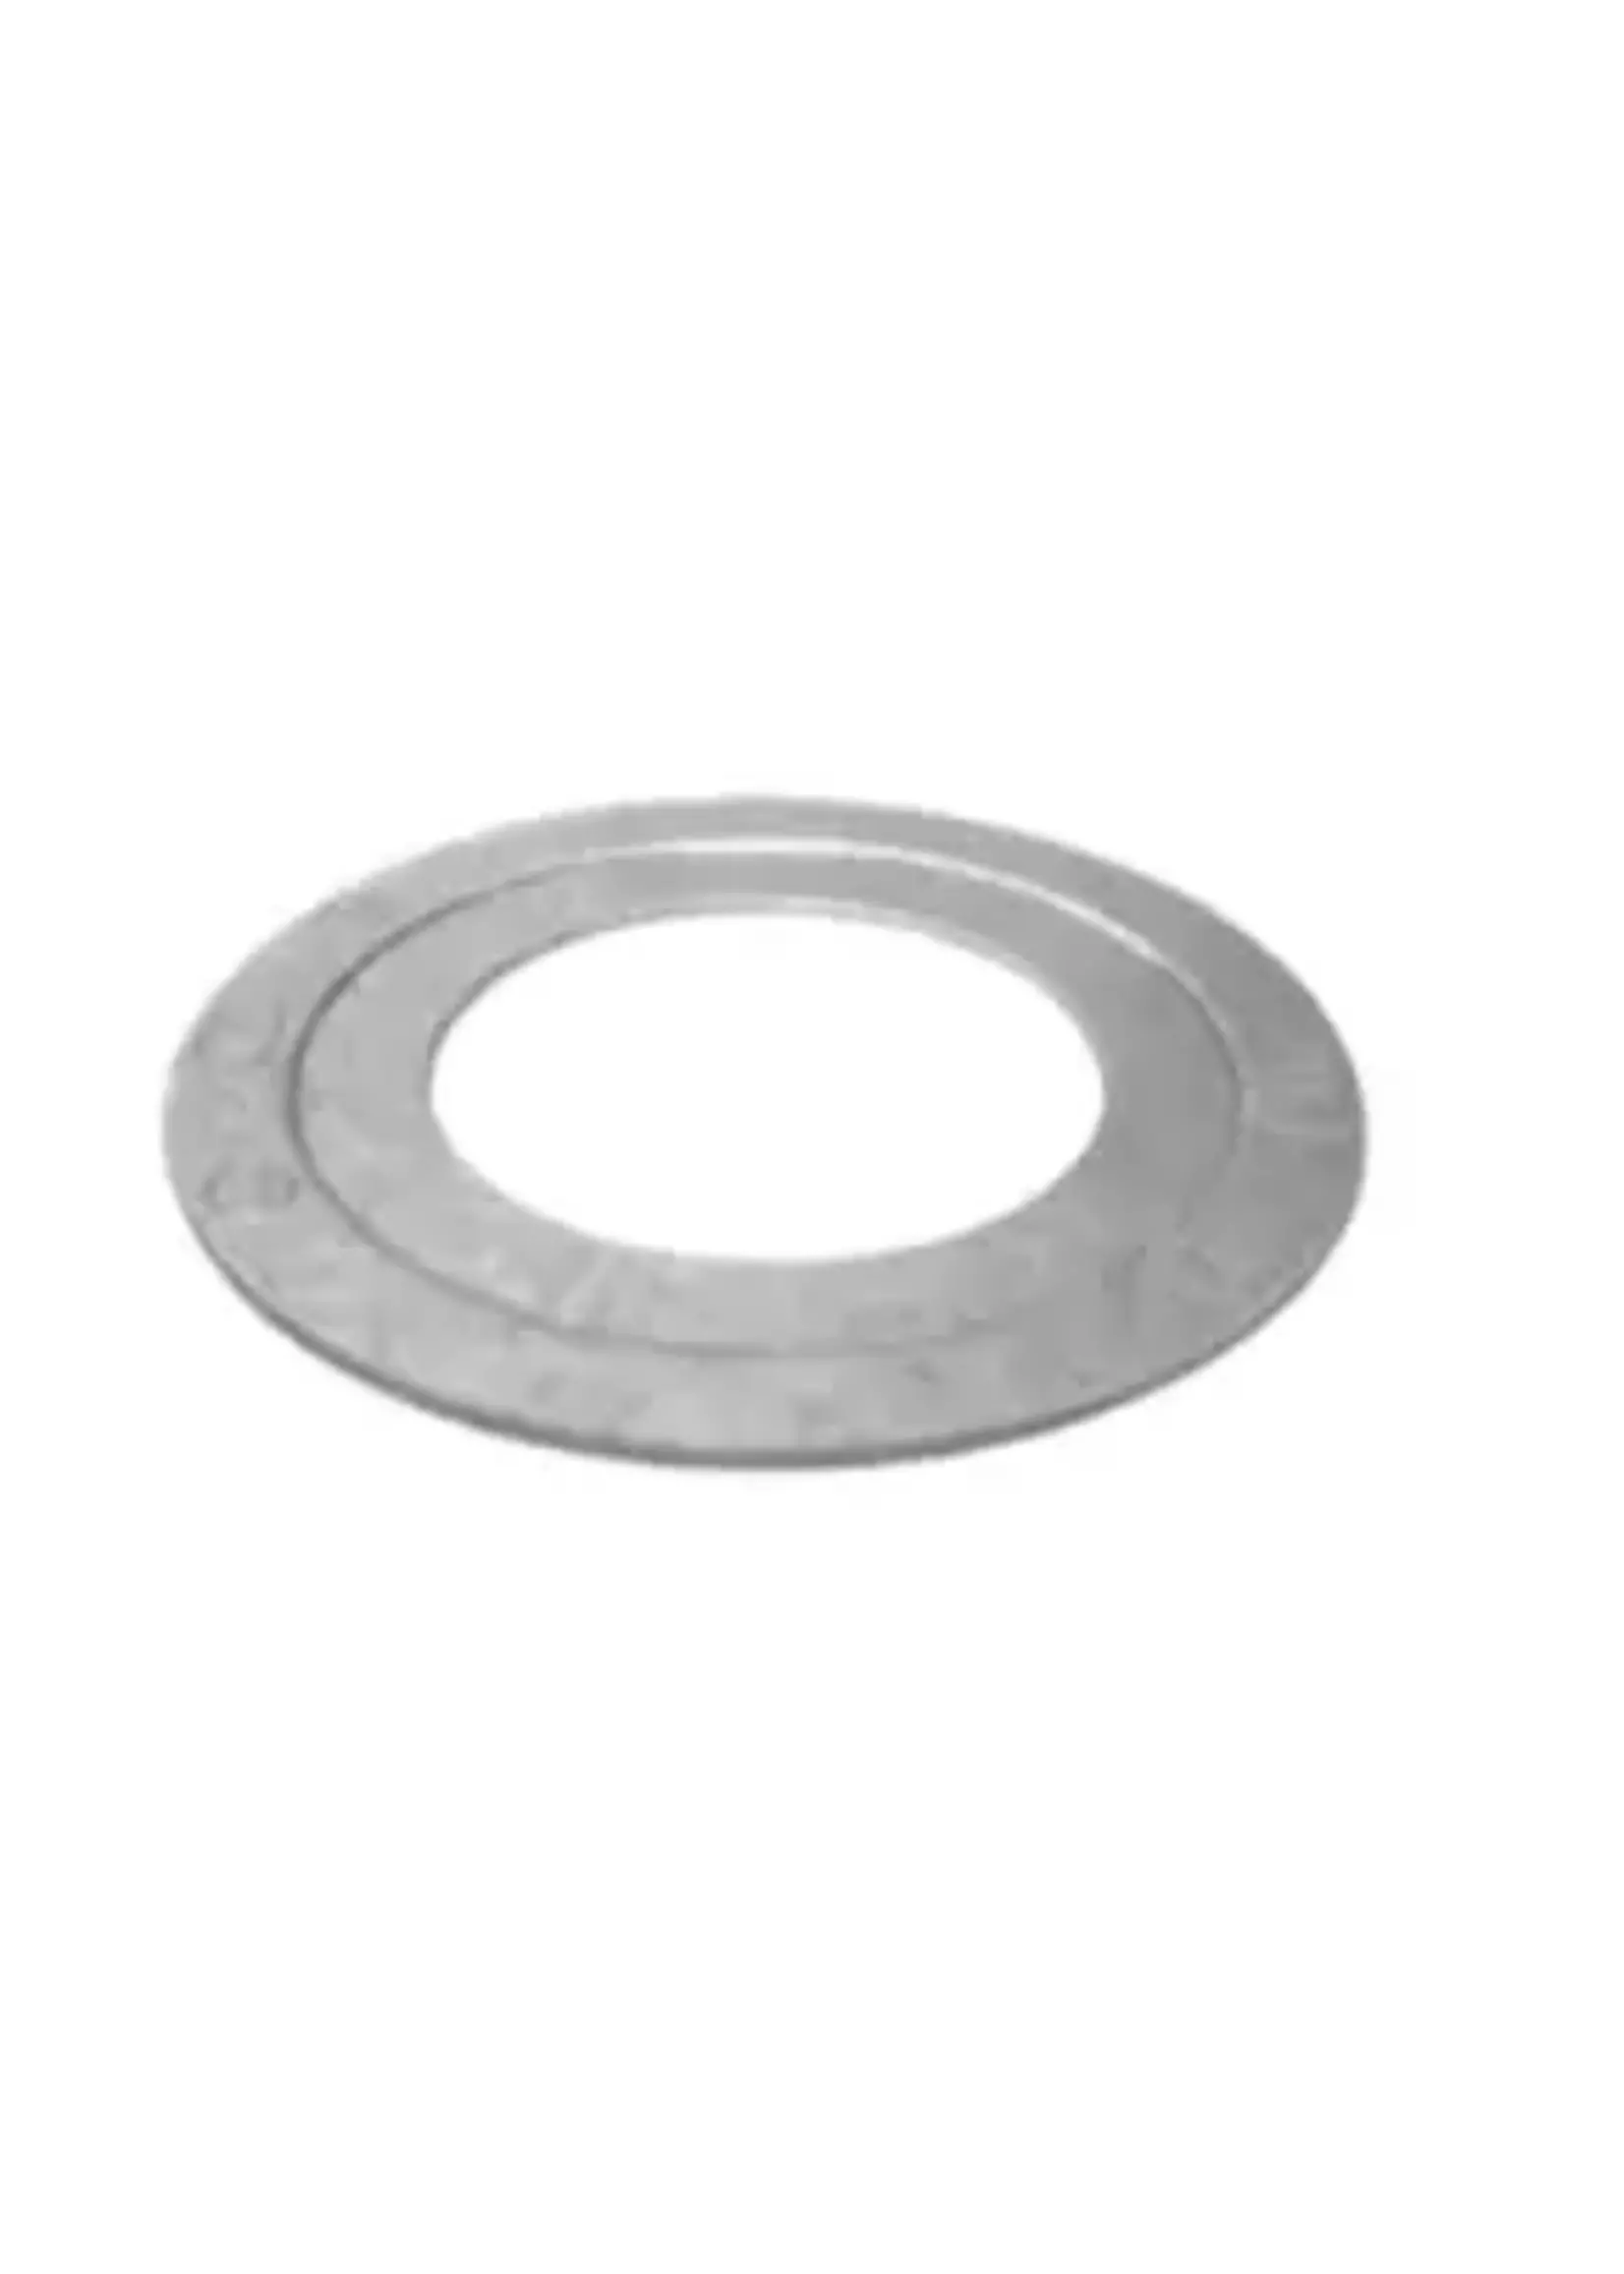 PECO REDUCED WASHER 3/4" X 1/2"  (32-00412)